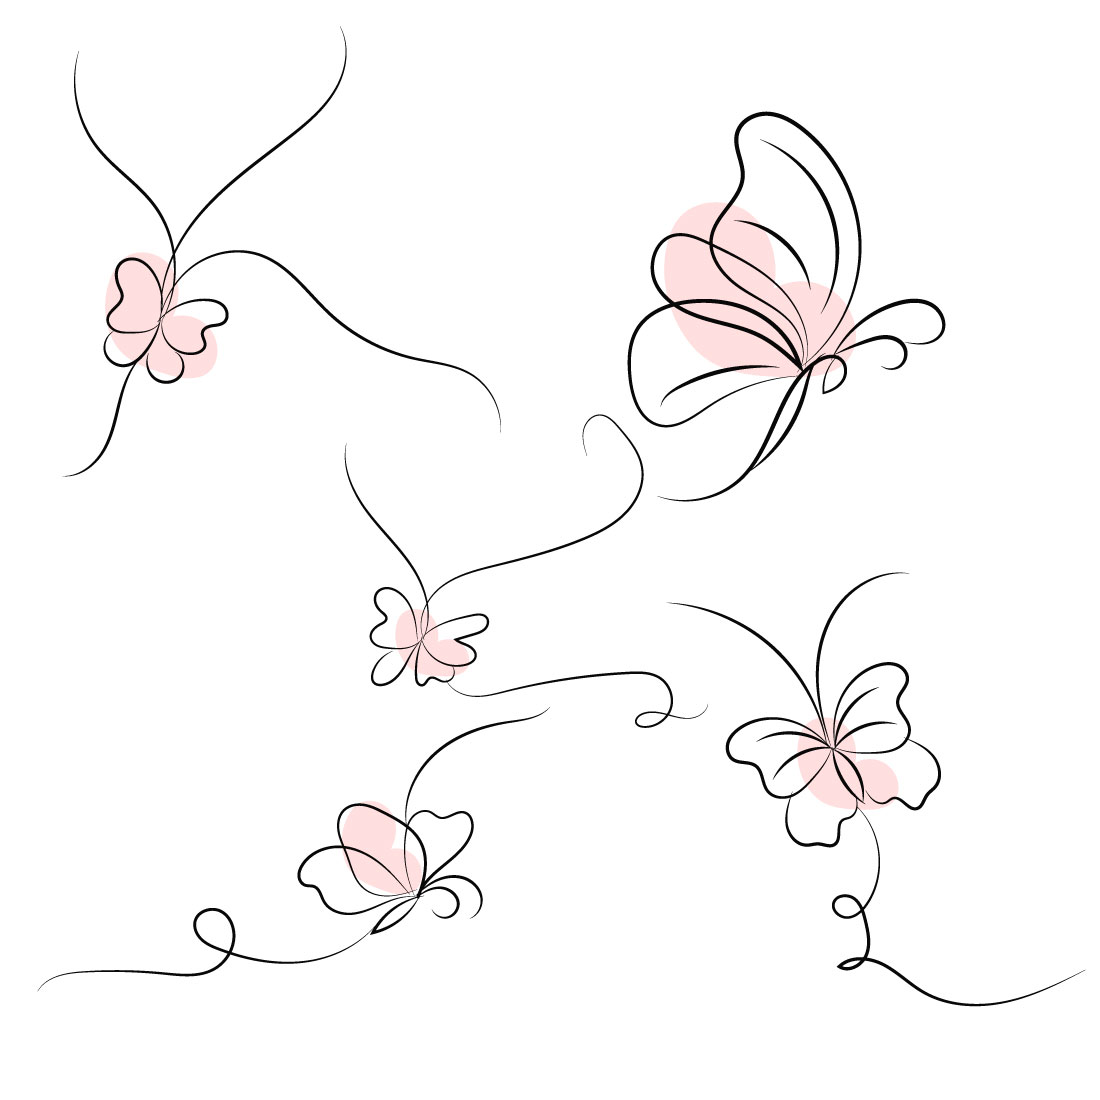 3 Realistic Butterfly Illustration Set Vector Download | Butterfly tattoo  stencil, Butterfly tattoo designs, Butterfly drawing images